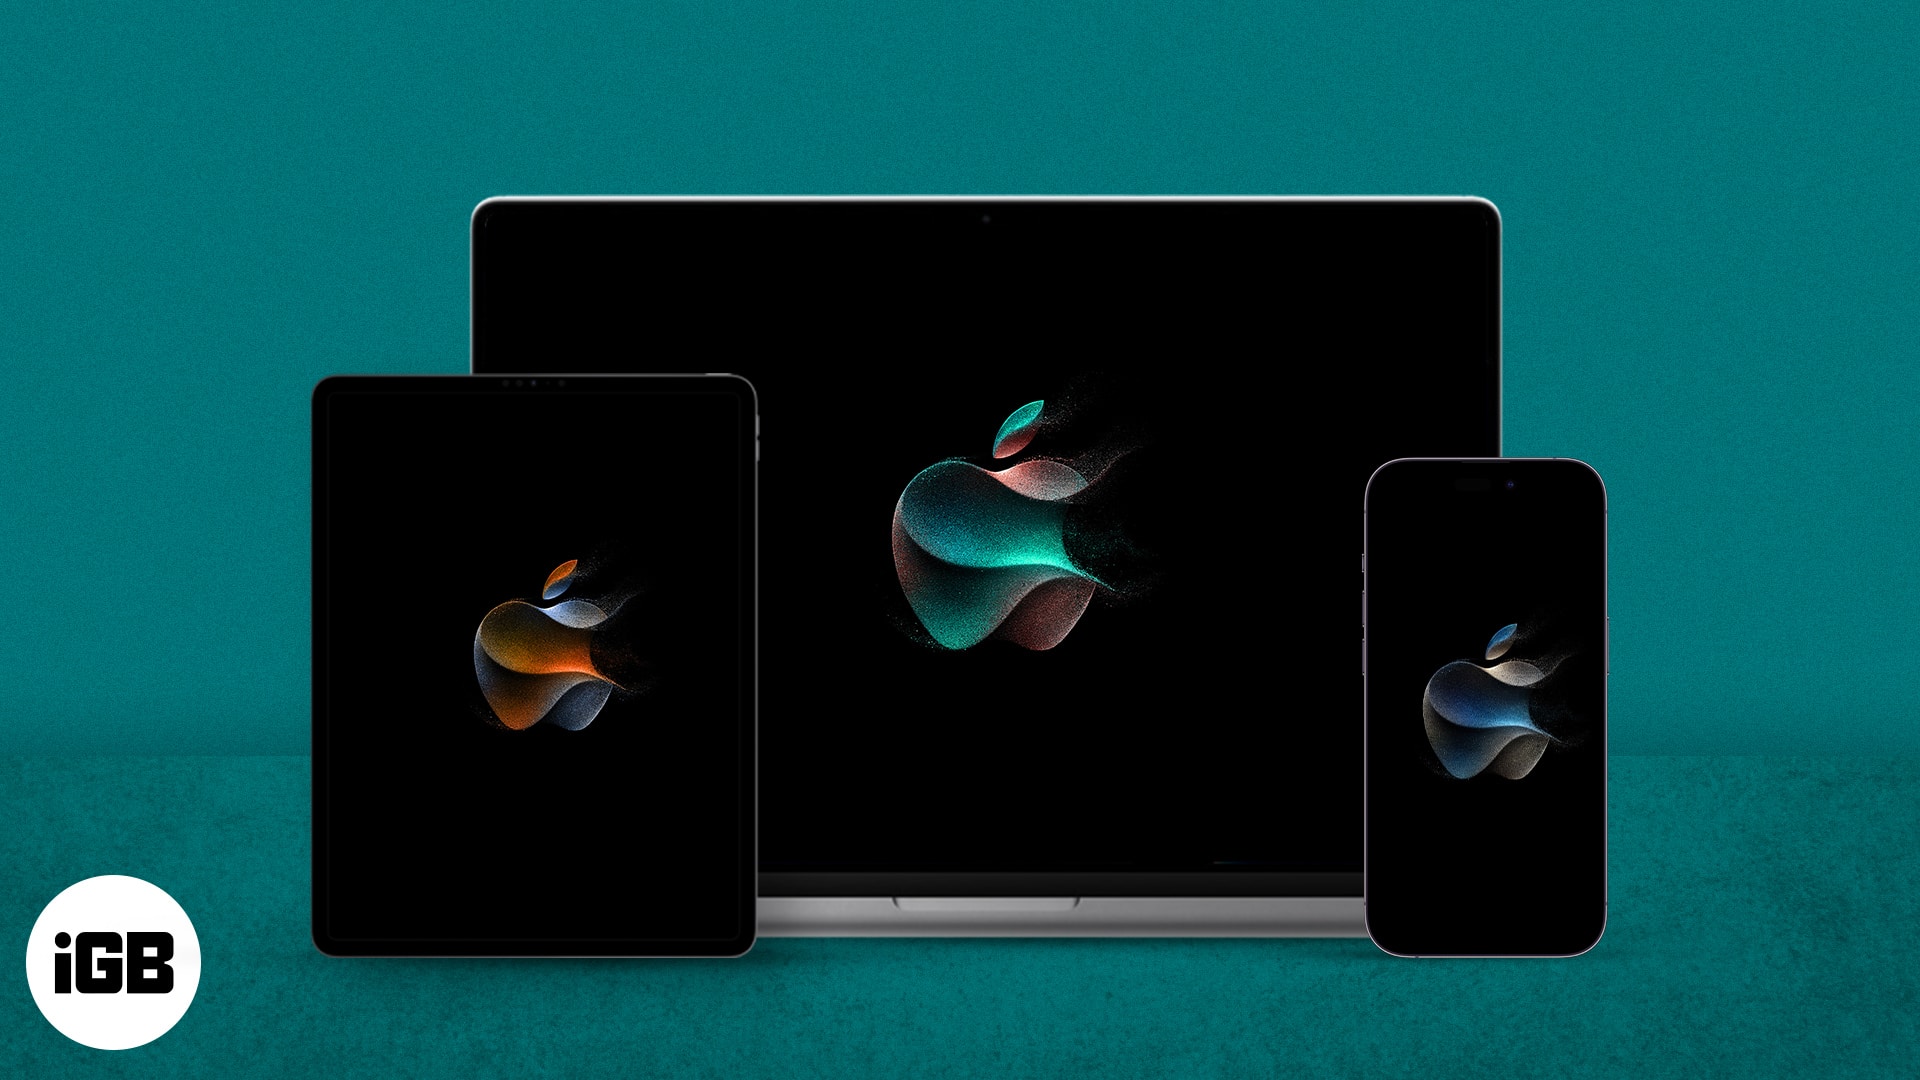 Apple's September Special Event Wallpapers for iPhone and iPad